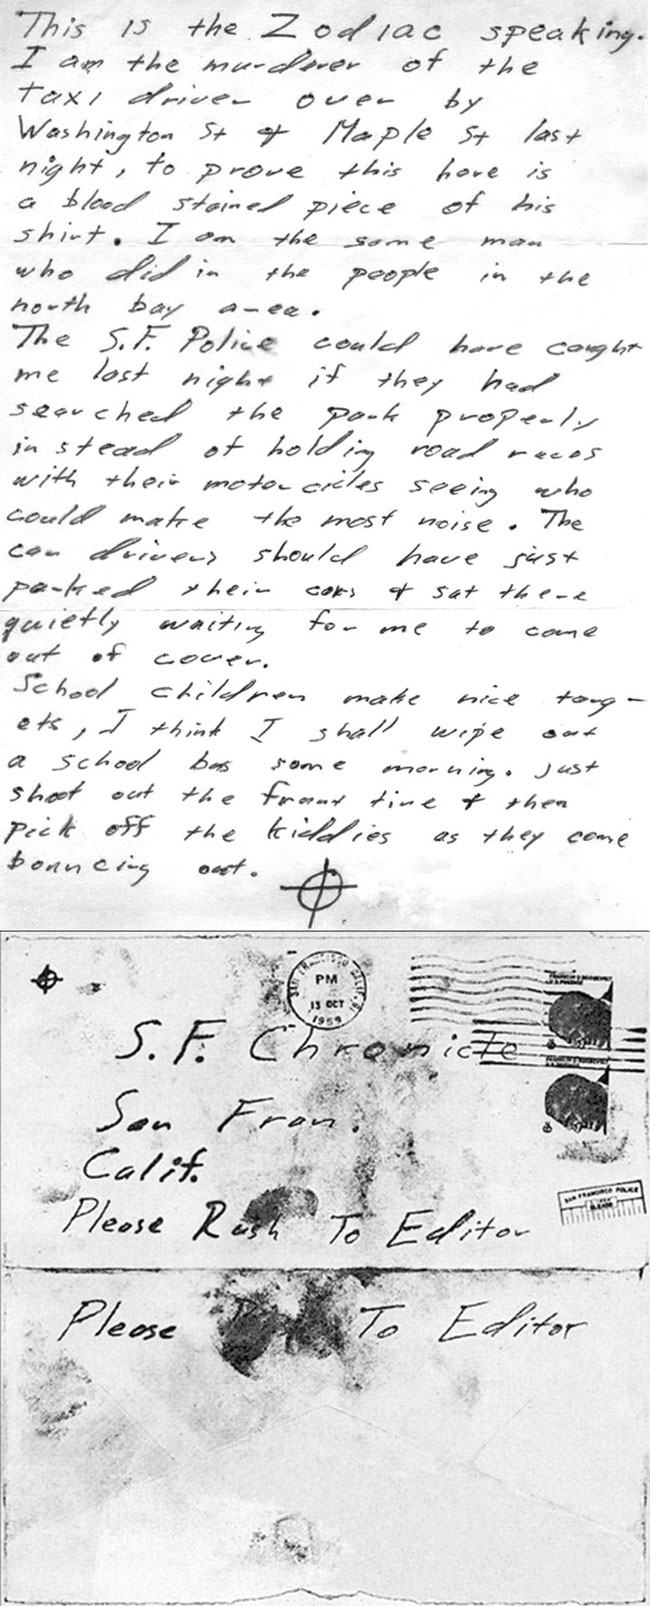 05-Letter-to-Chronicle-postmarked-Oct-13-1969